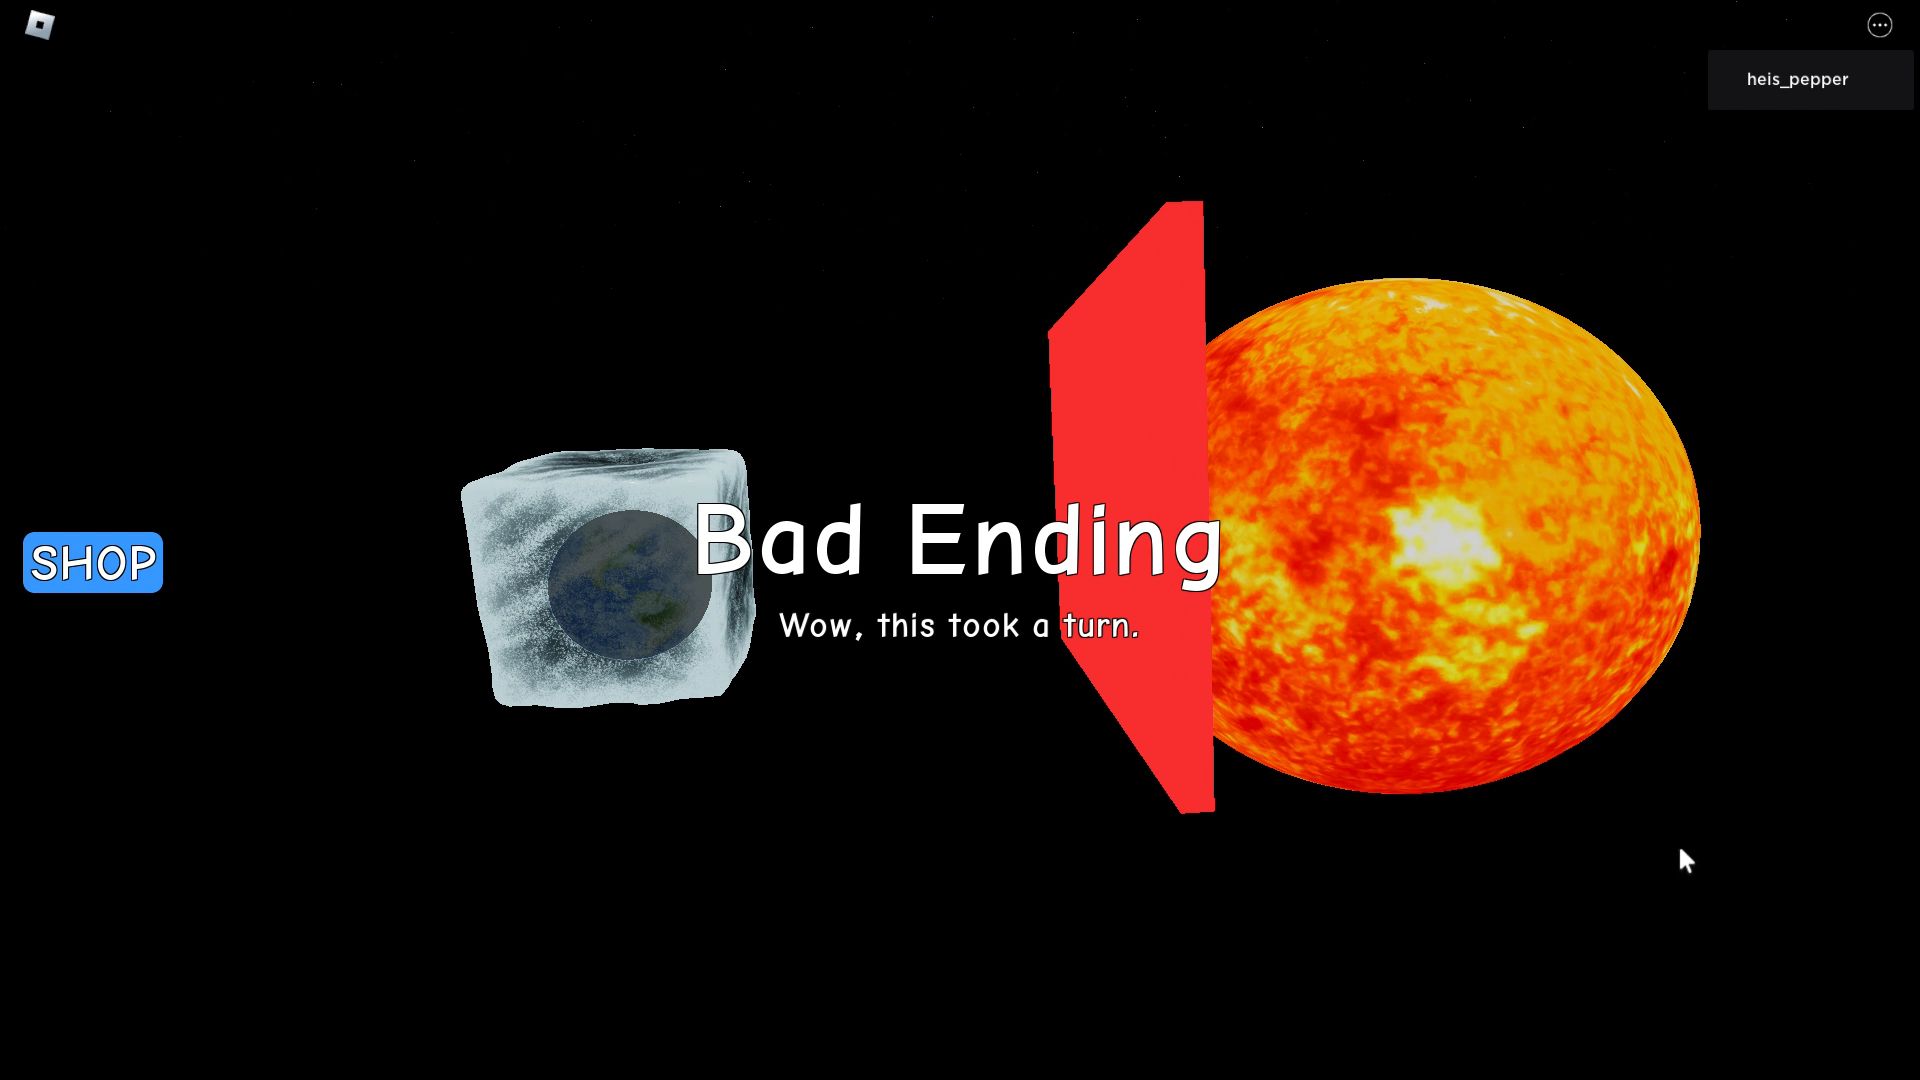 Need More Cold Bad Ending